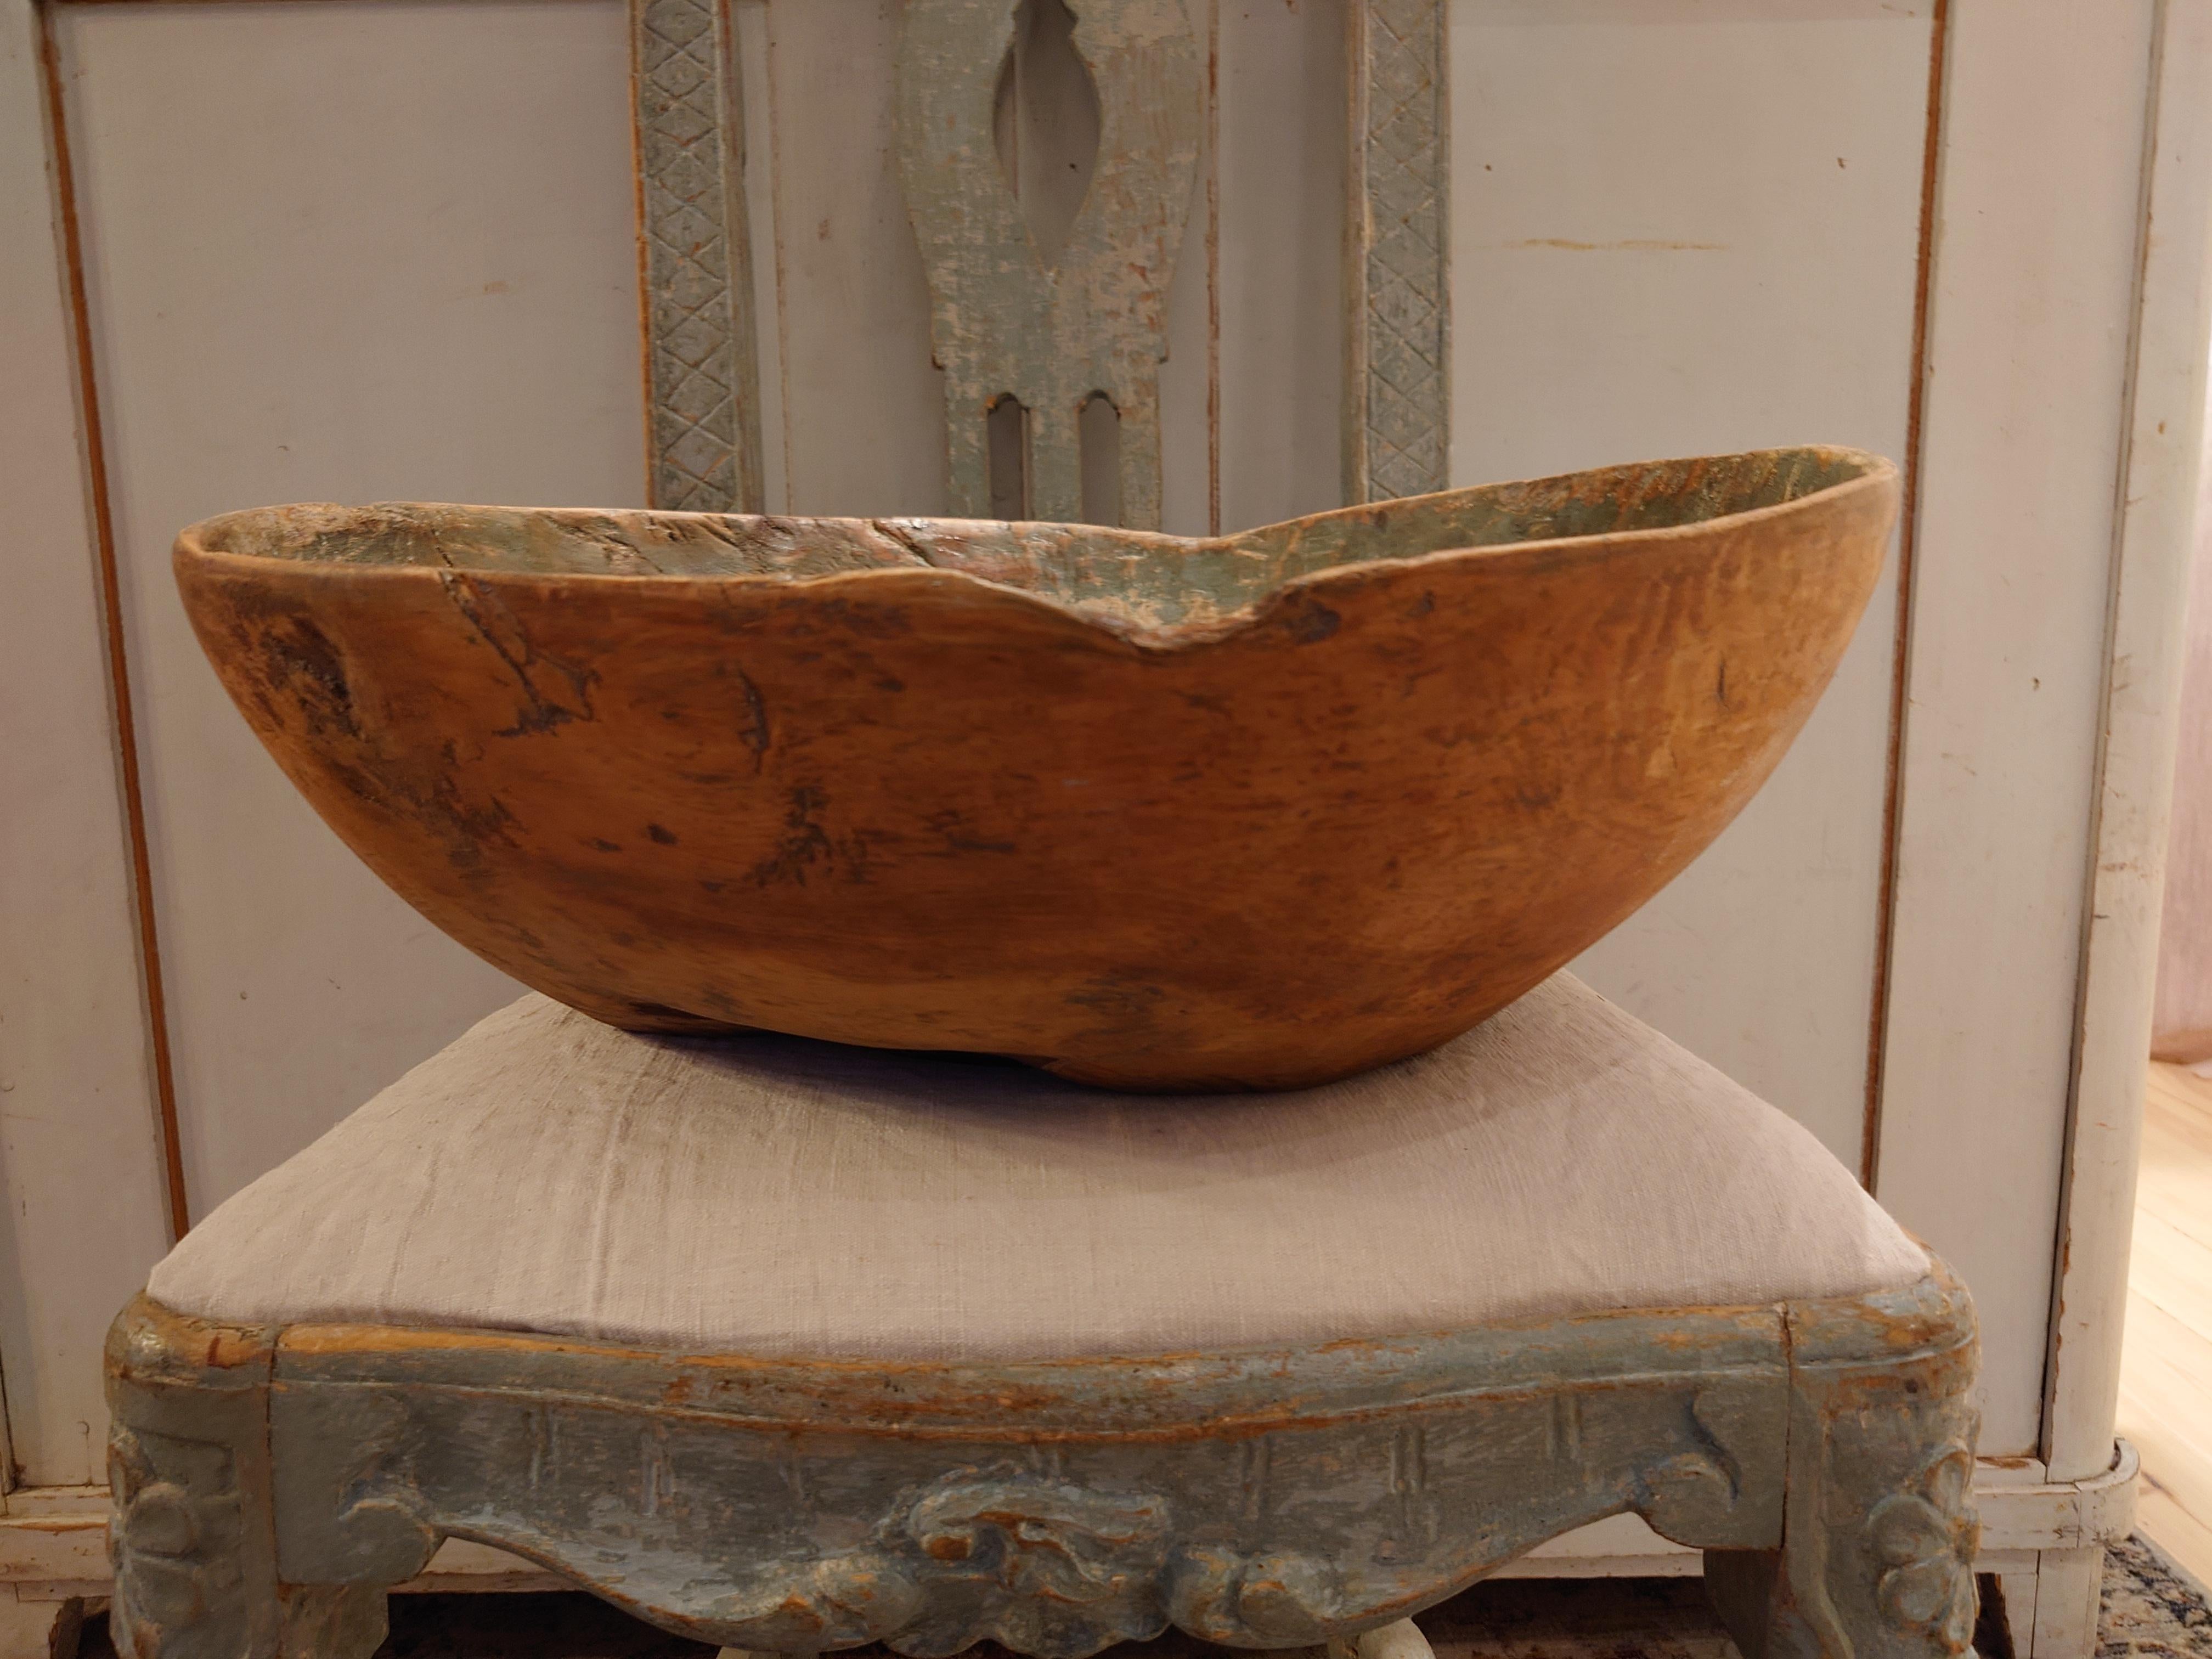   An antique and unique organic wooden bowl. With highly appealing patina, with traces of use. Produced in Sweden,  early 19th century.
The bowl has original paint inside
Beautiful in any room,a real centerpiece.
These bowls where very important for